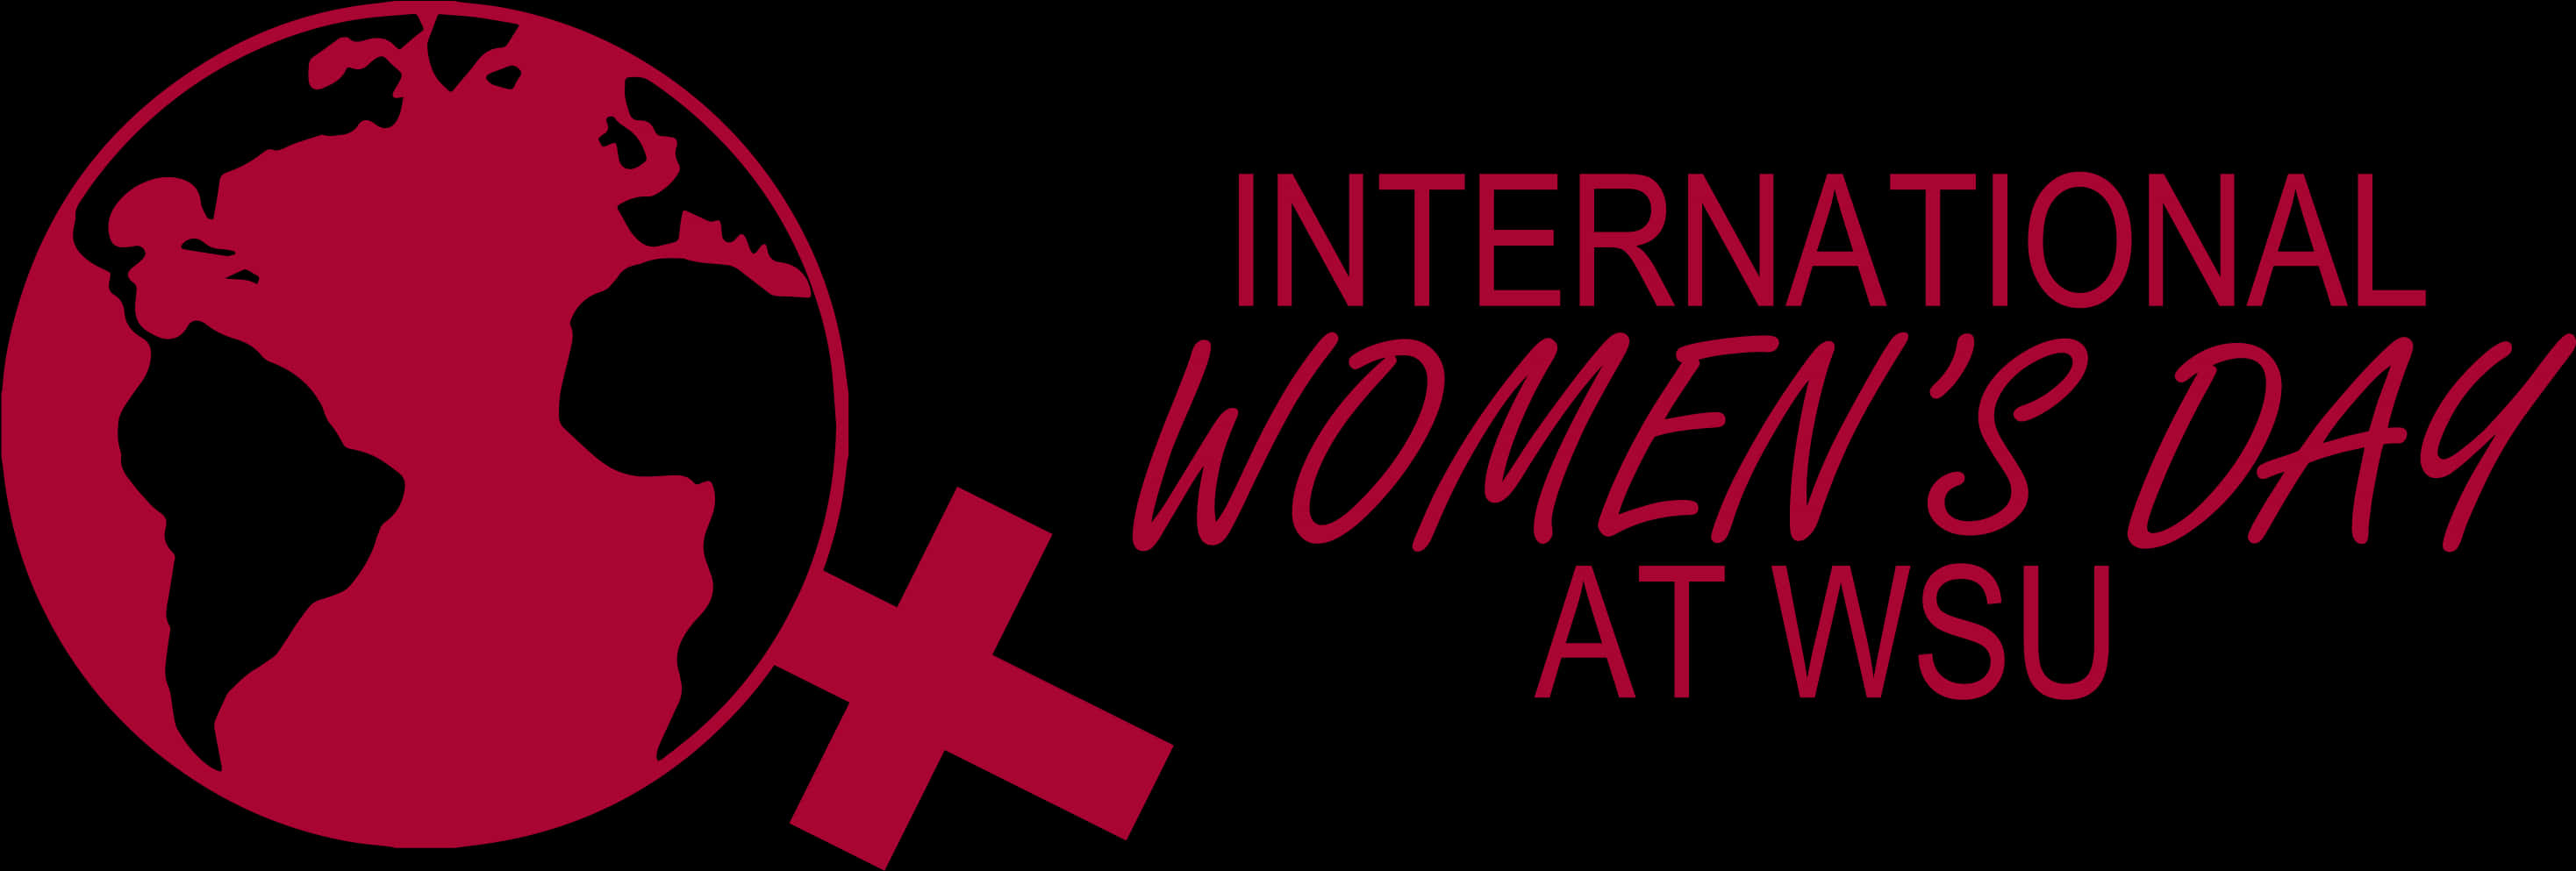 International Womens Day W S U Event Banner PNG image